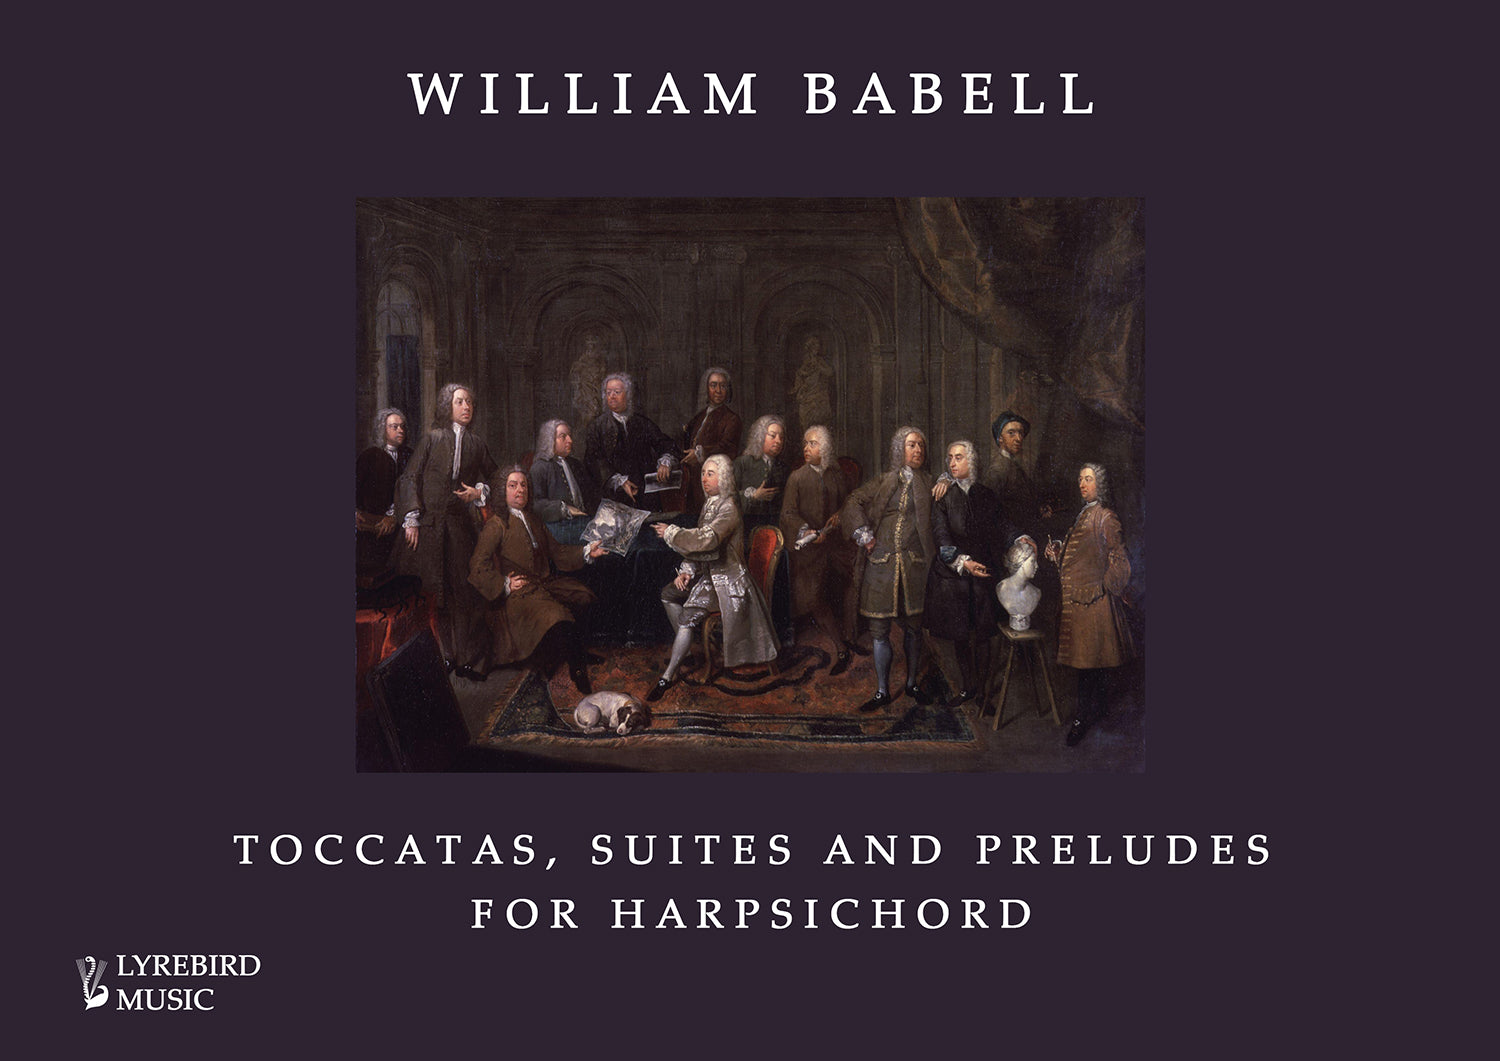 Babell: Toccatas, Suites and Preludes